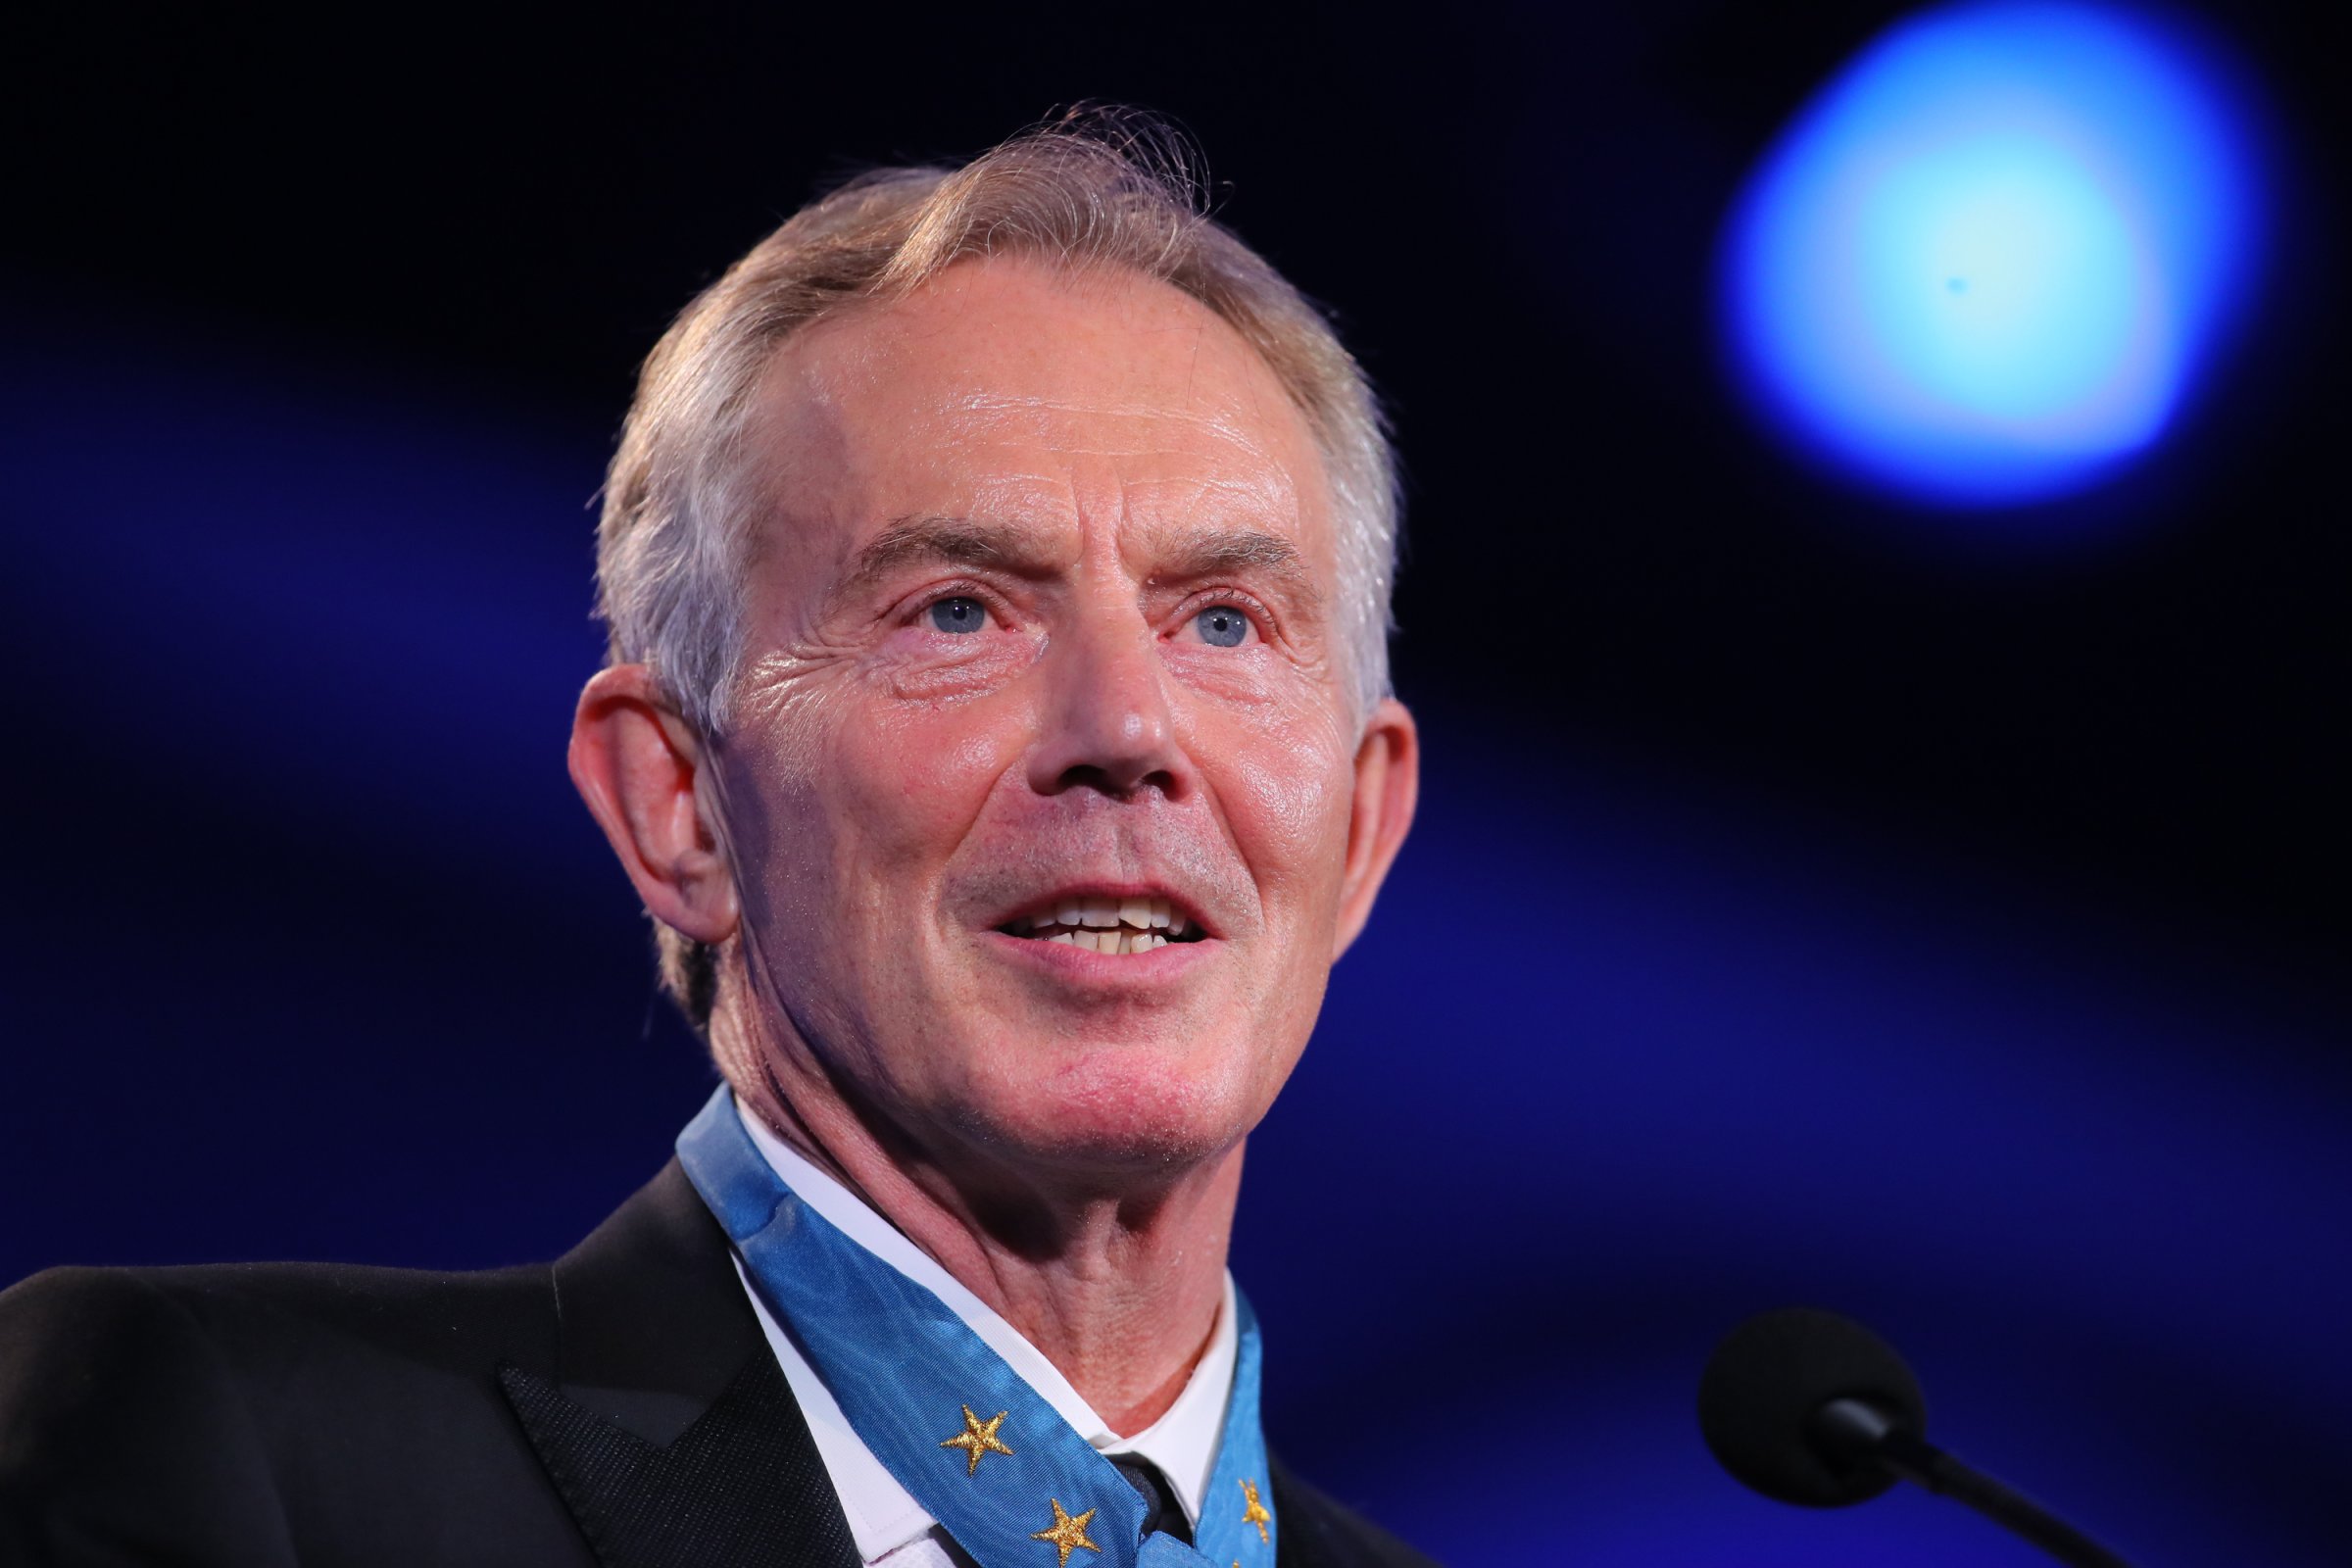 Former British Prime Minister Tony Blair at the 2016 Starkey Hearing Foundation "So the World May Hear" awards gala at the St Paul RiverCentre on July 17, 2016 in St Paul, Minnesota.